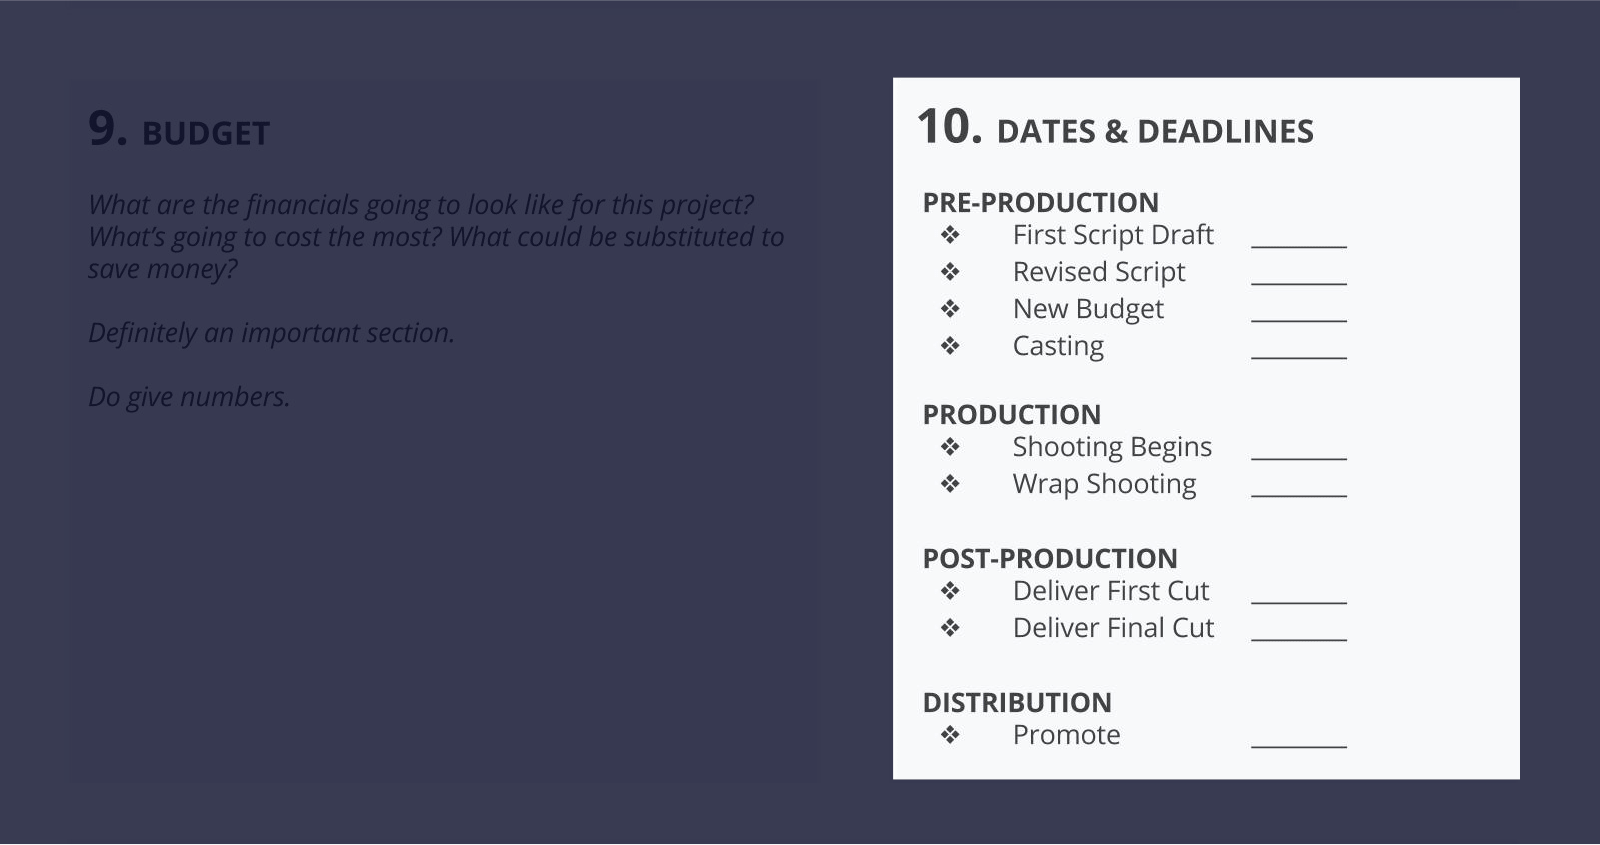 The Best Creative Brief Template For Video Agencies [Free Download] - Section 10 - Dates and deadlines